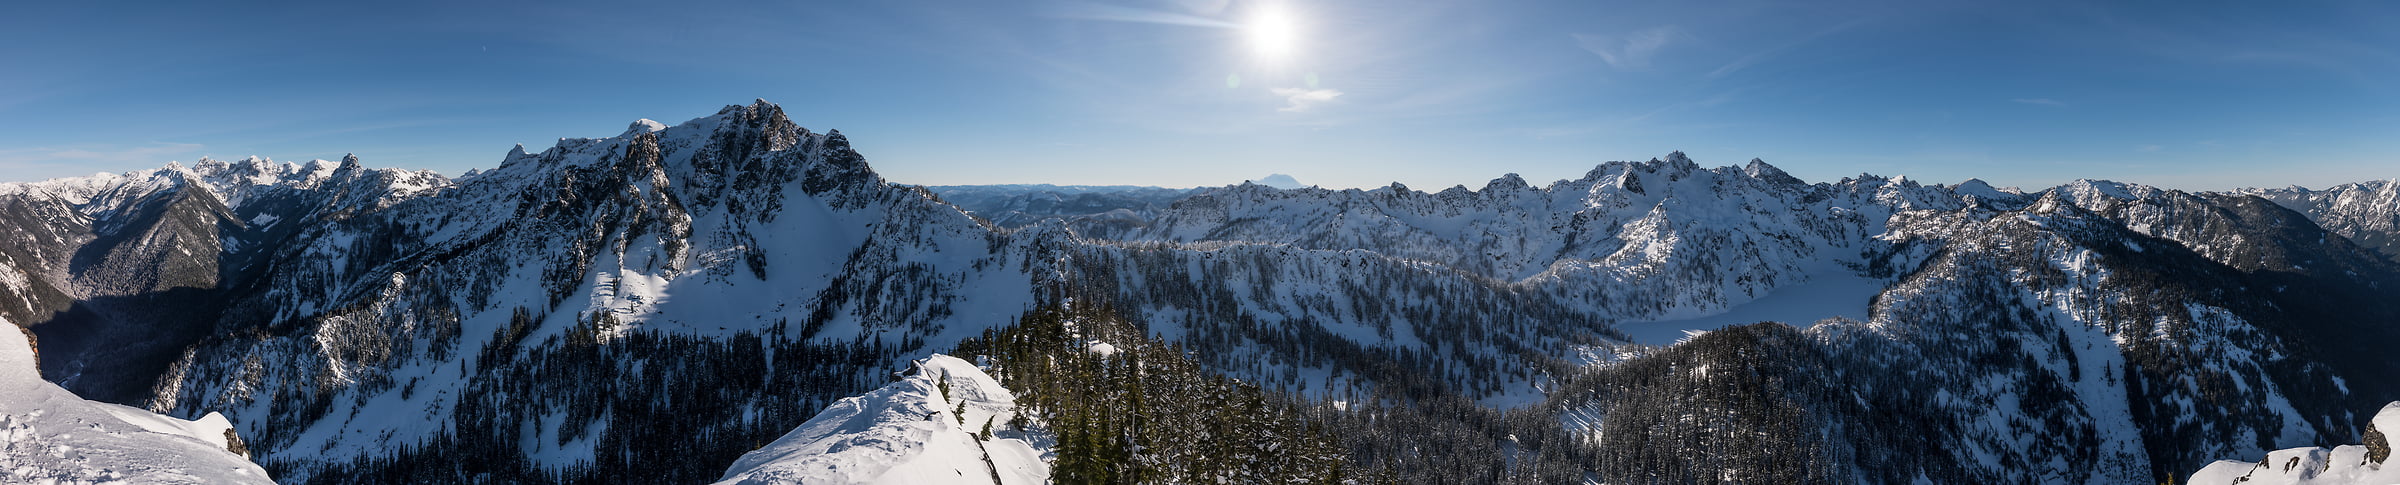 225 megapixels! An extremely high resolution, large-format VAST photo print of the Cascade Mountains from Avalanche Mountain in Snoqualmie Pass; fine art panorama landscape photo created by Scott Rinckenberger in Washington, USA